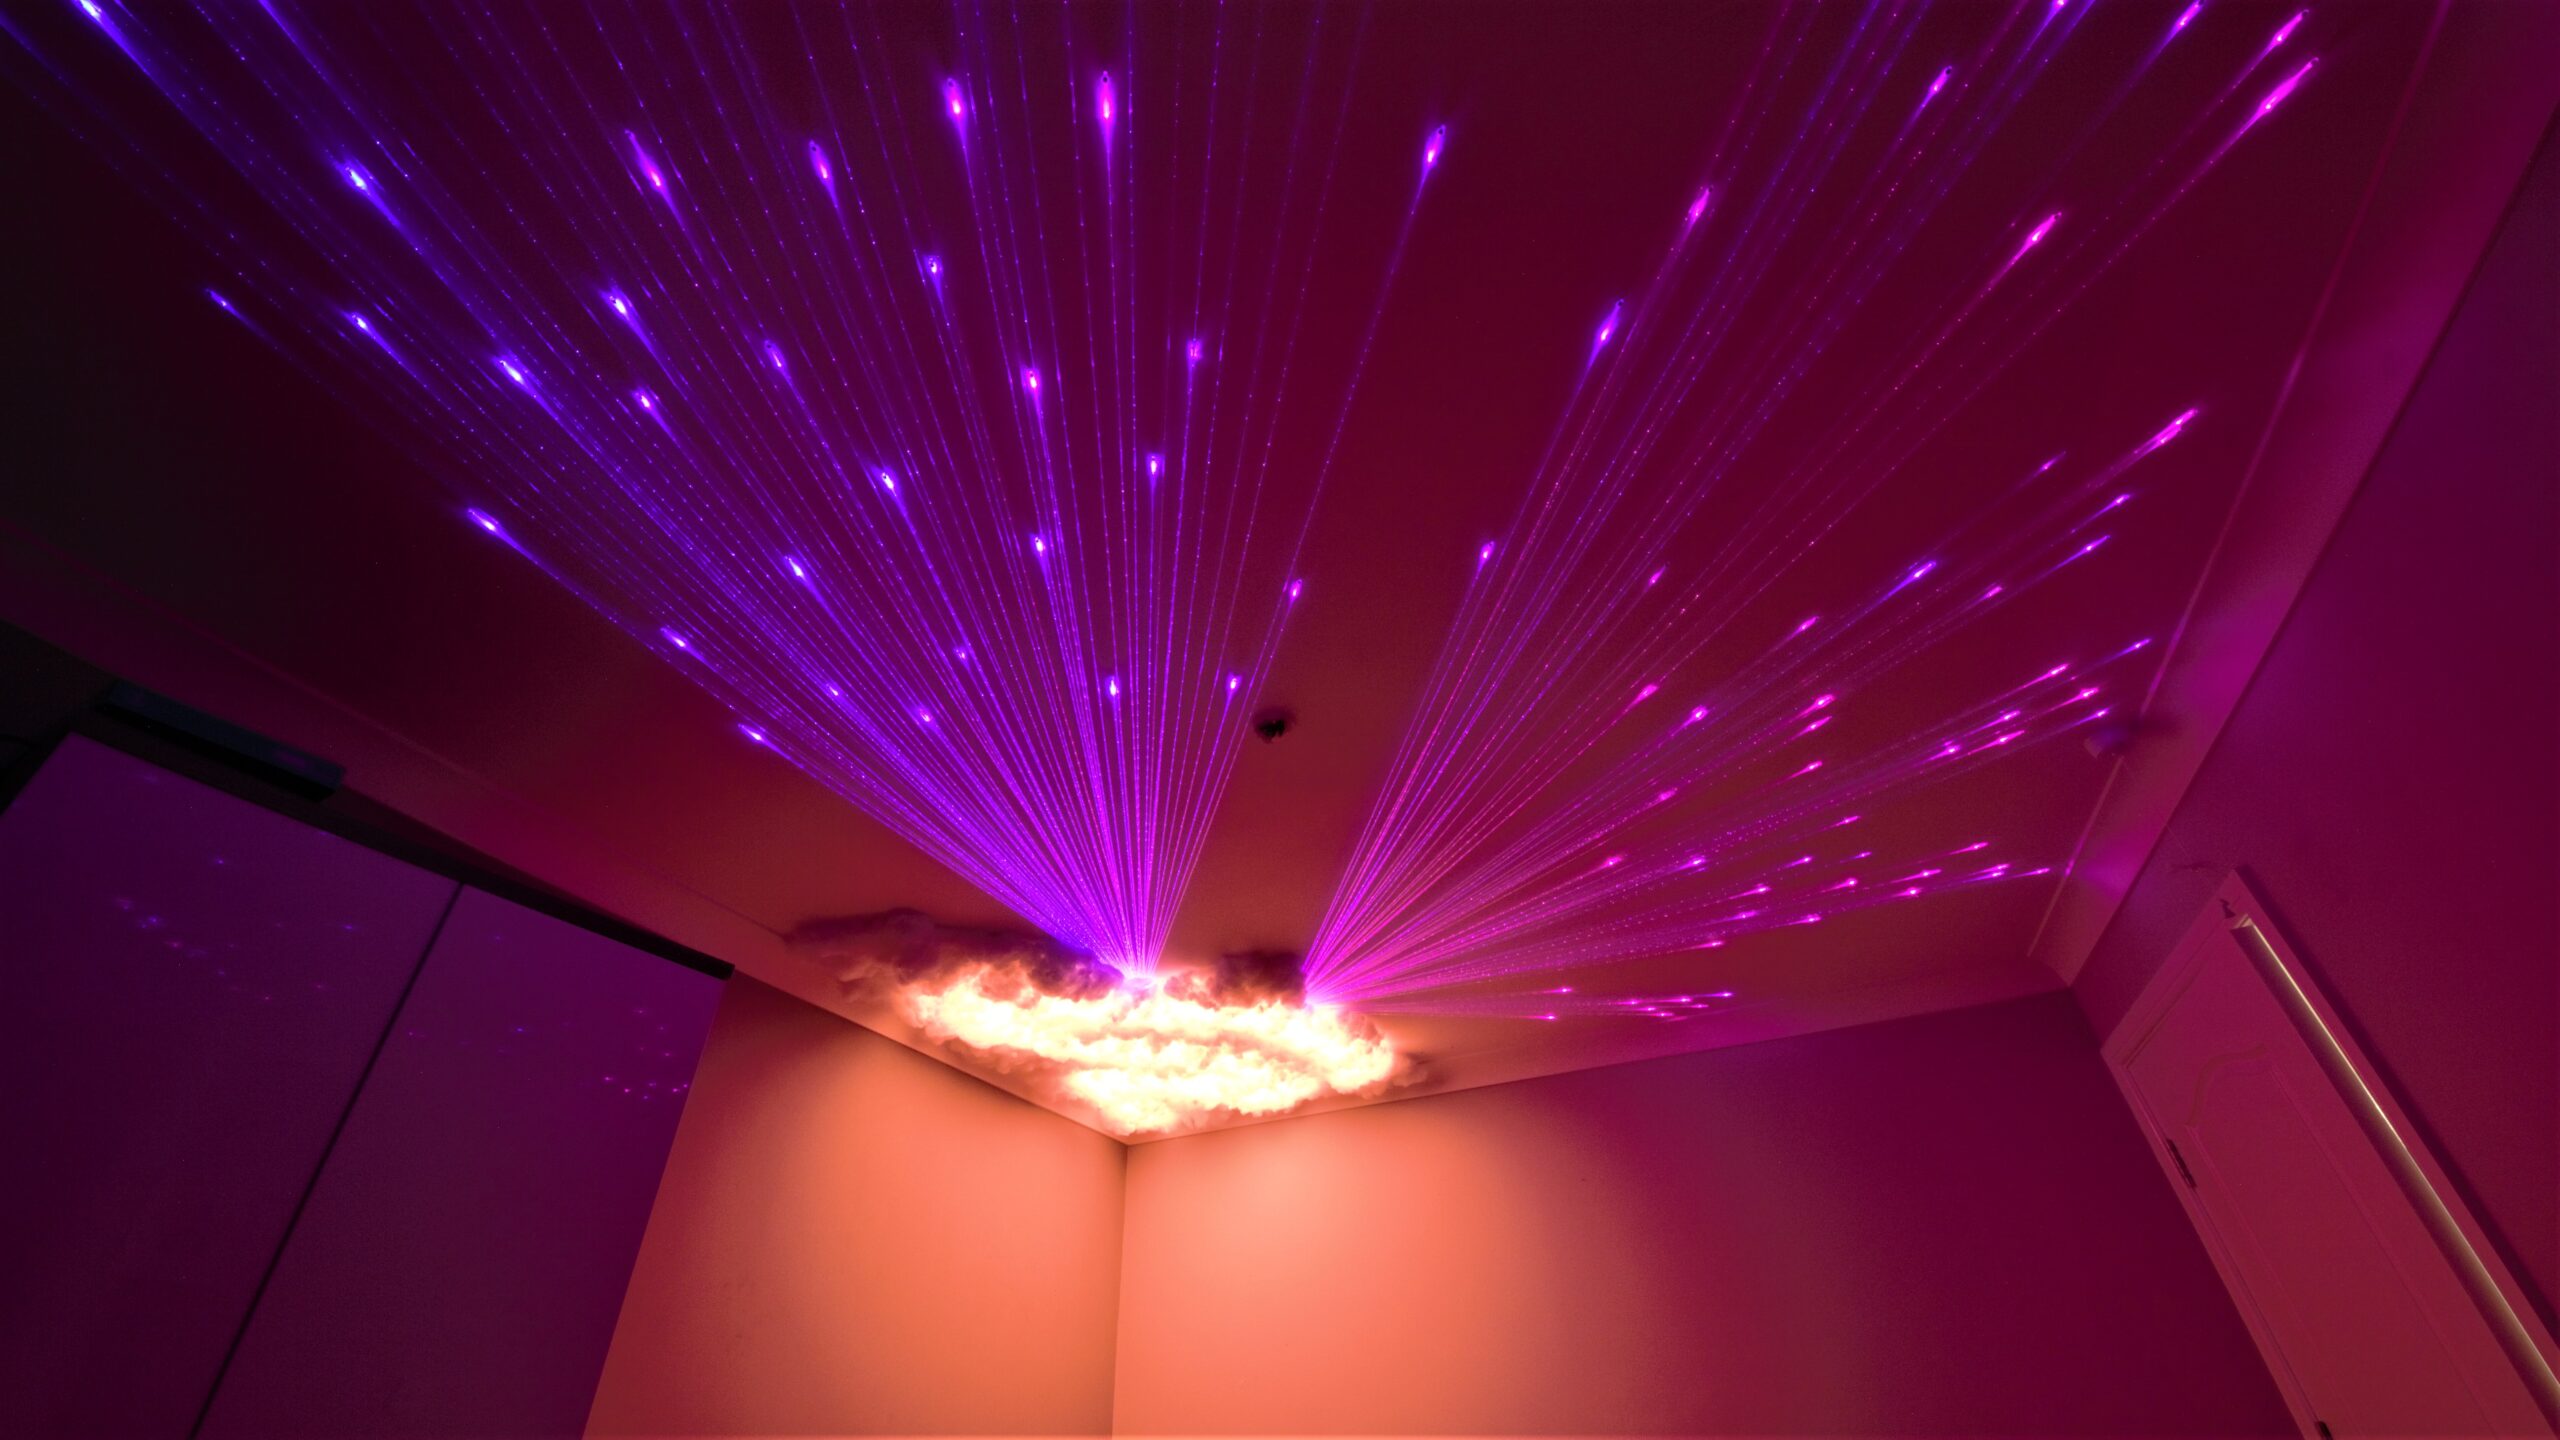 fibre optic lighting installation with led clouds